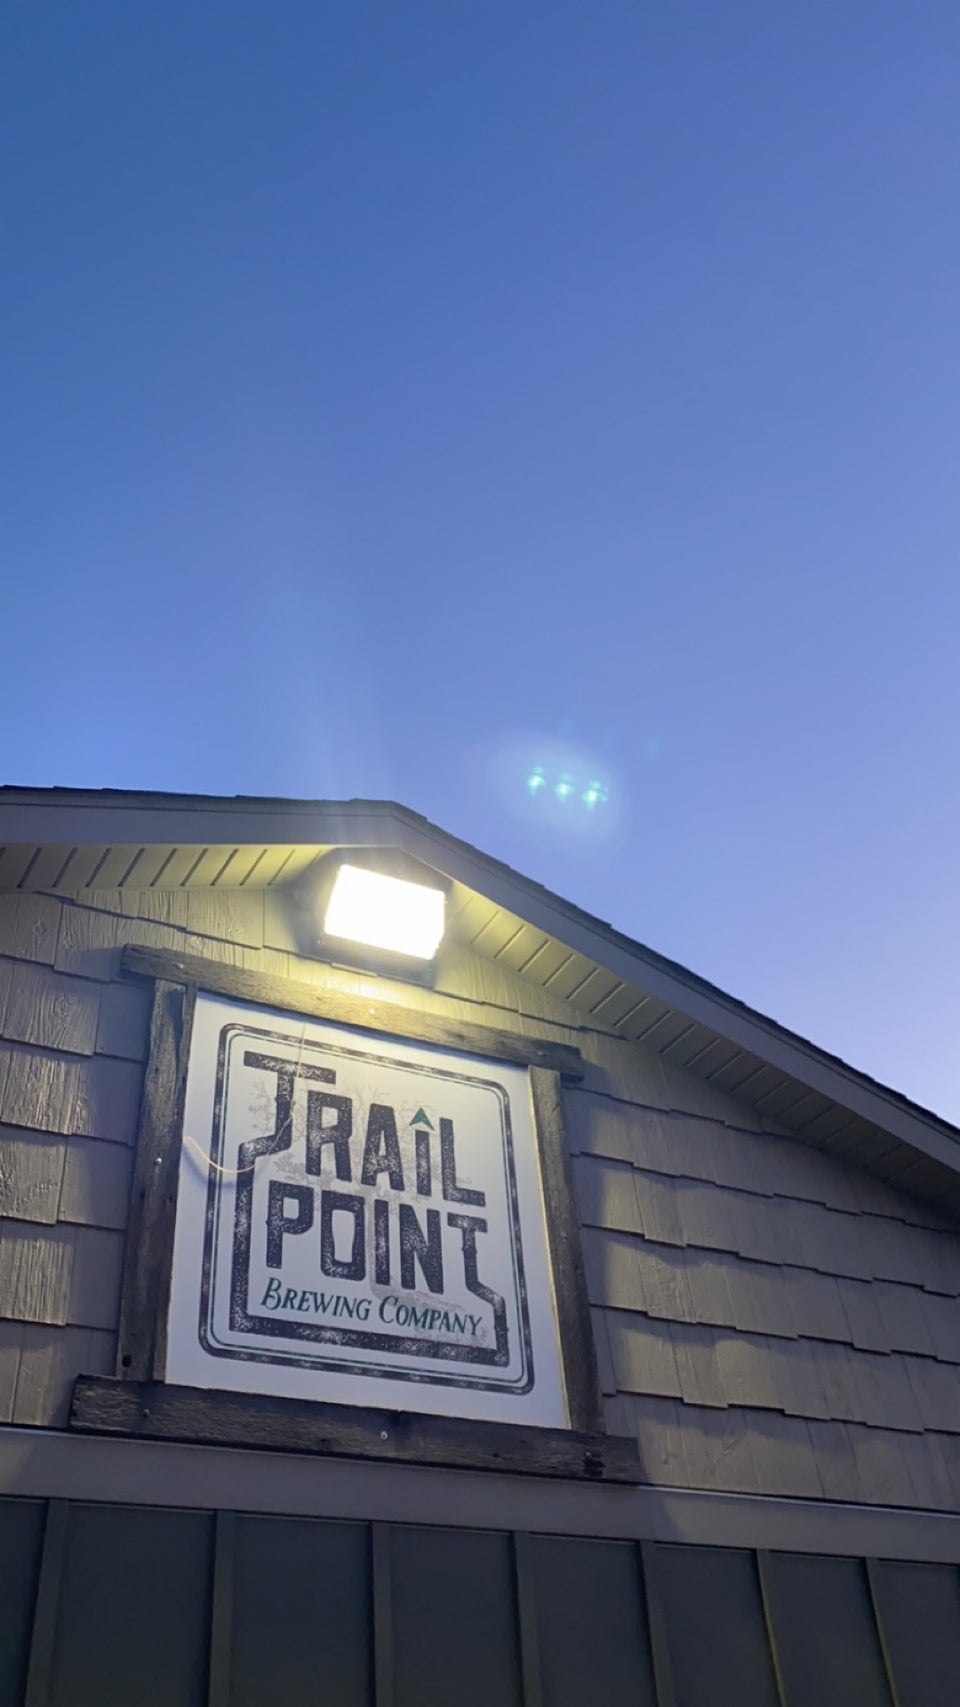 Trail Point Brewing Company